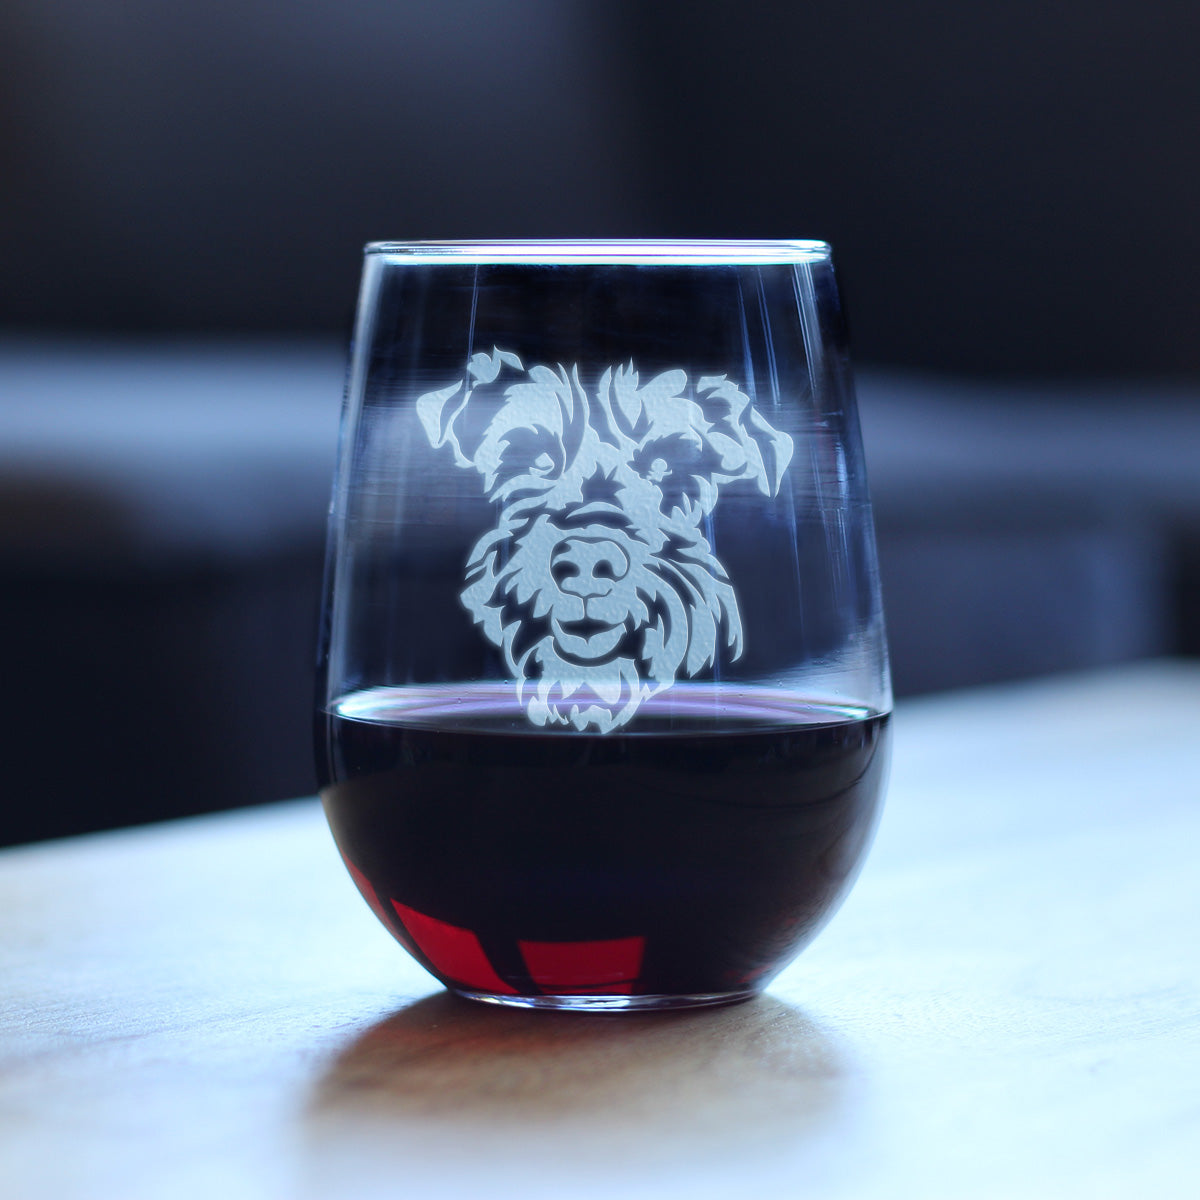 Schnauzer Face Stemless Wine Glass - Cute Dog Themed Decor and Gifts for Moms &amp; Dads of Schnauzers - Large 17 Oz